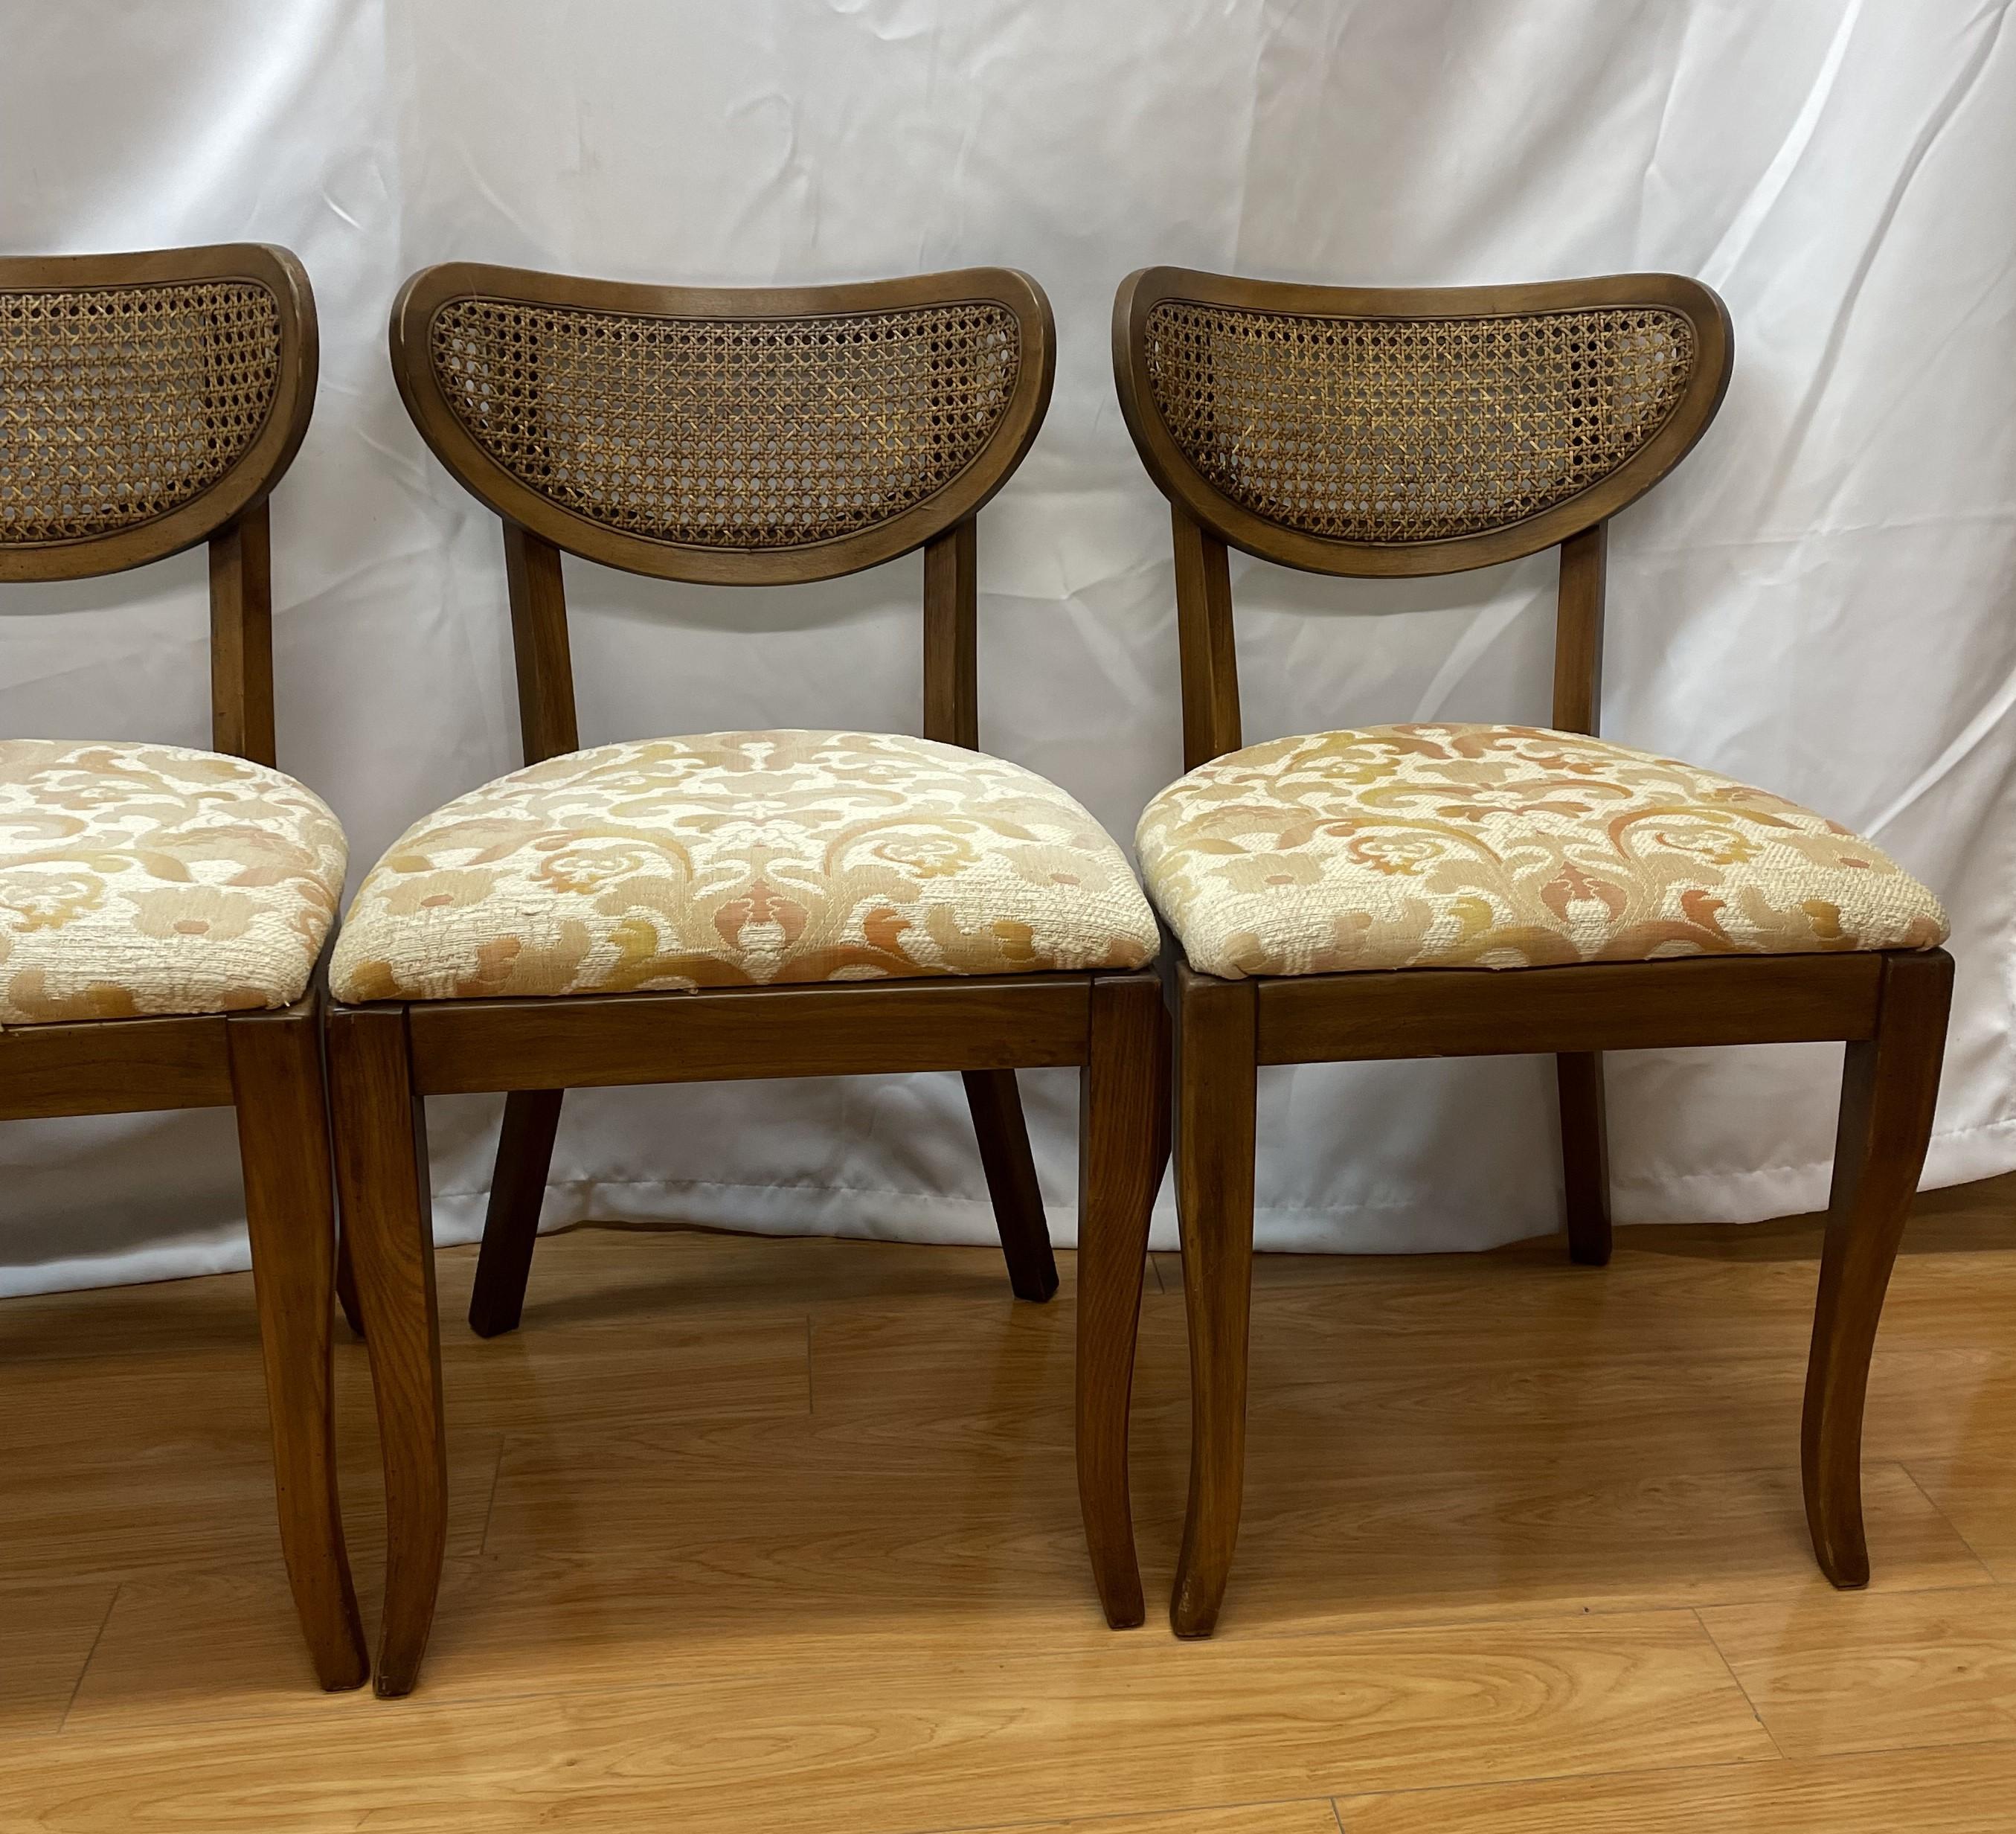 Set of four mid-century caned back chairs 

19 x 10 x 32